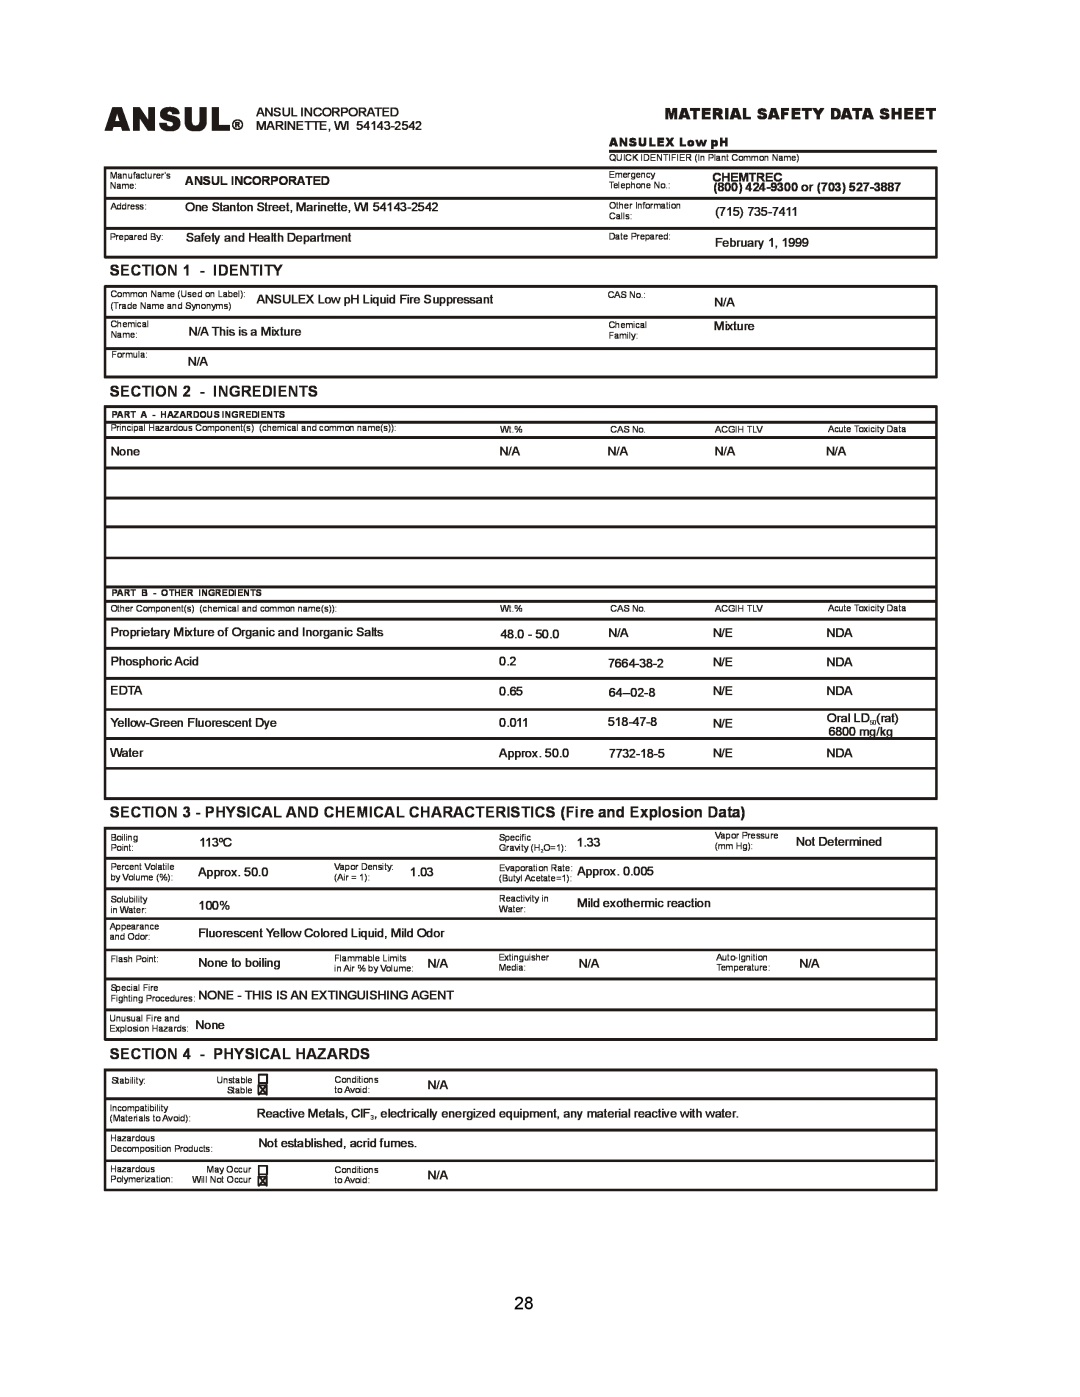 Wells WVOC-4HS Ansul, Identity, Ingredients, Physical Hazards, Material Safety Data Sheet, ANSULEX Low pH, Chemtrec 